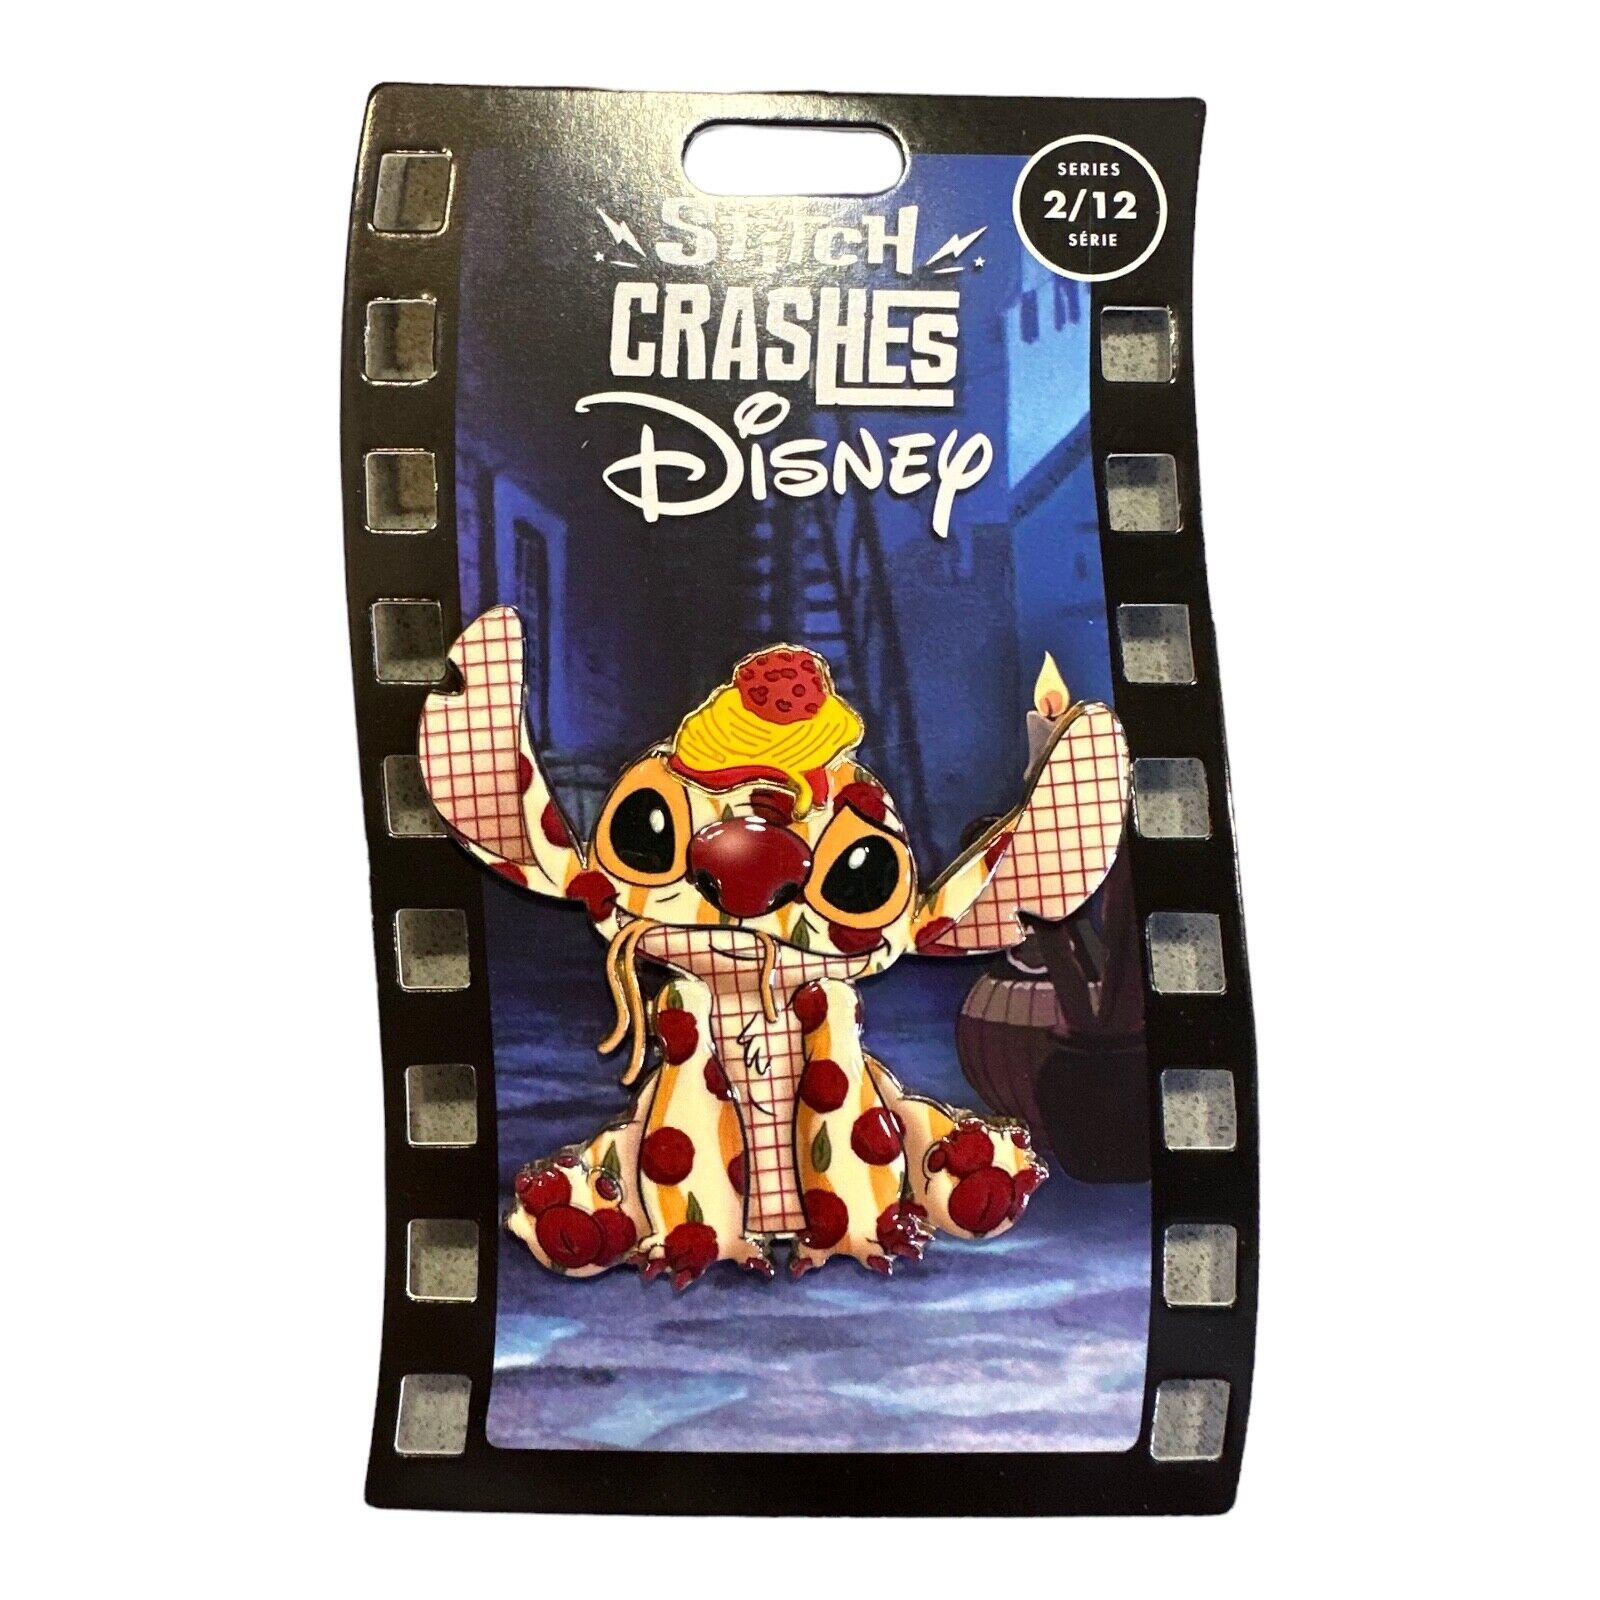 2021 Disney Parks Stitch Crashes Lady & The Tramp Pin 2/12 Limited Release